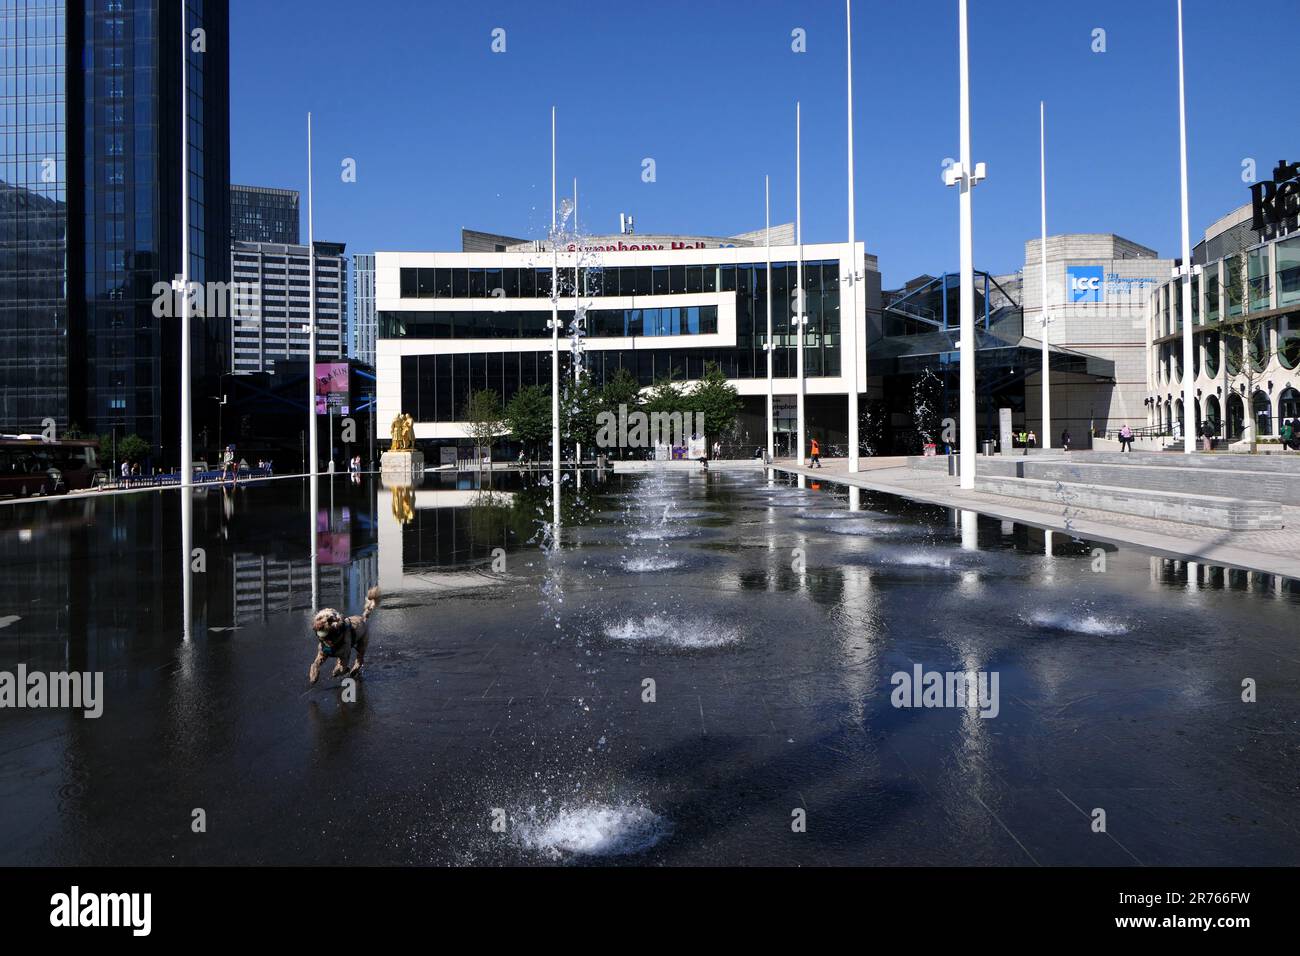 cooling down in the fountain in Birmingham, UK Stock Photo